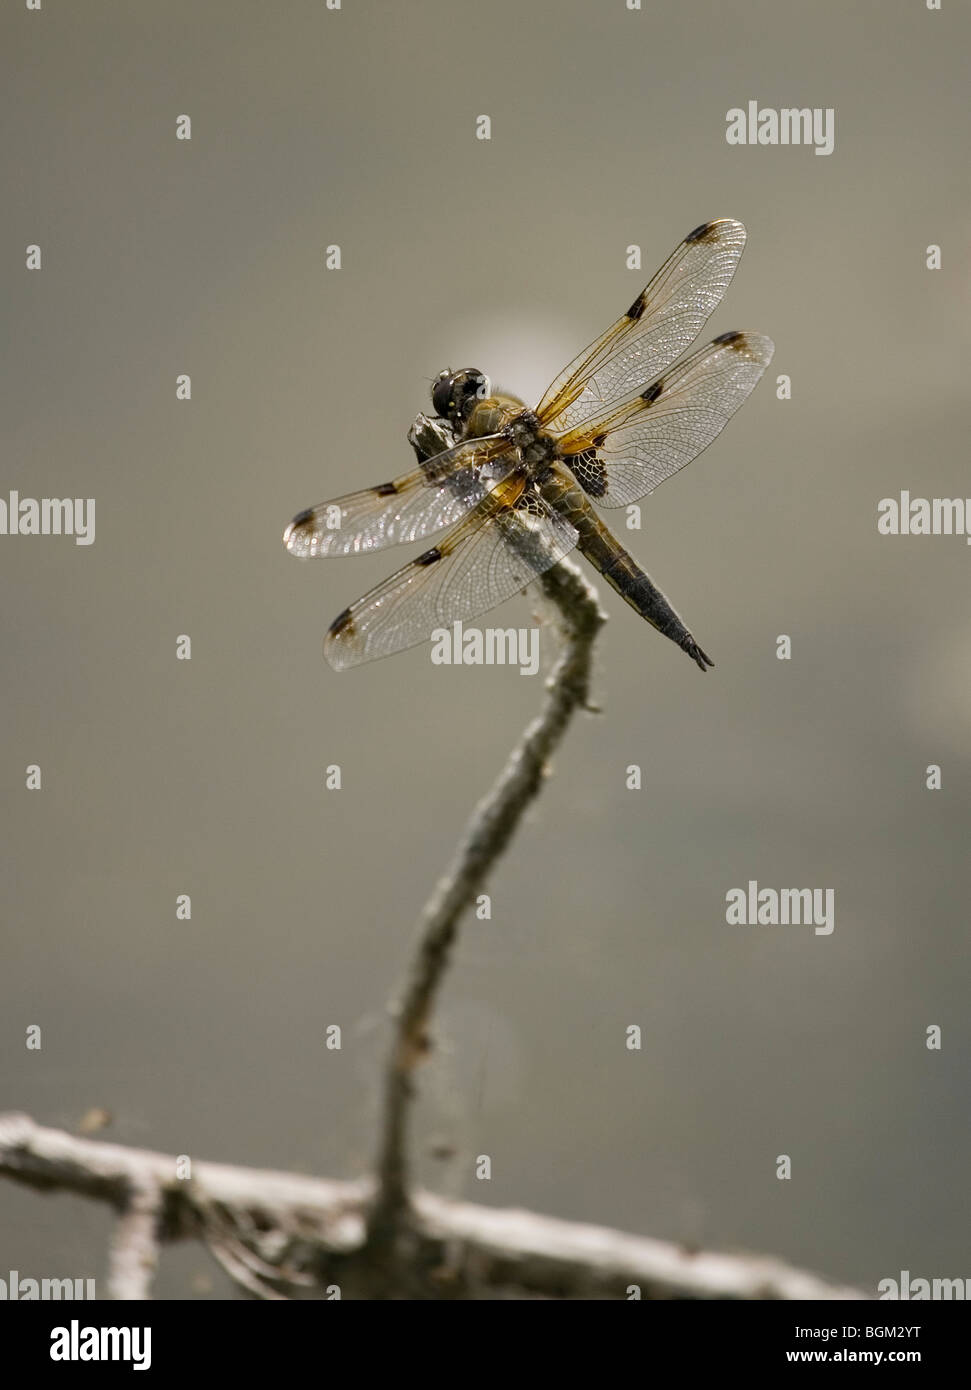 A Four-spotted Chaser (Libellula quadrimaculata) dragonfly on a perch at Lackford lakes, Suffolk Stock Photo